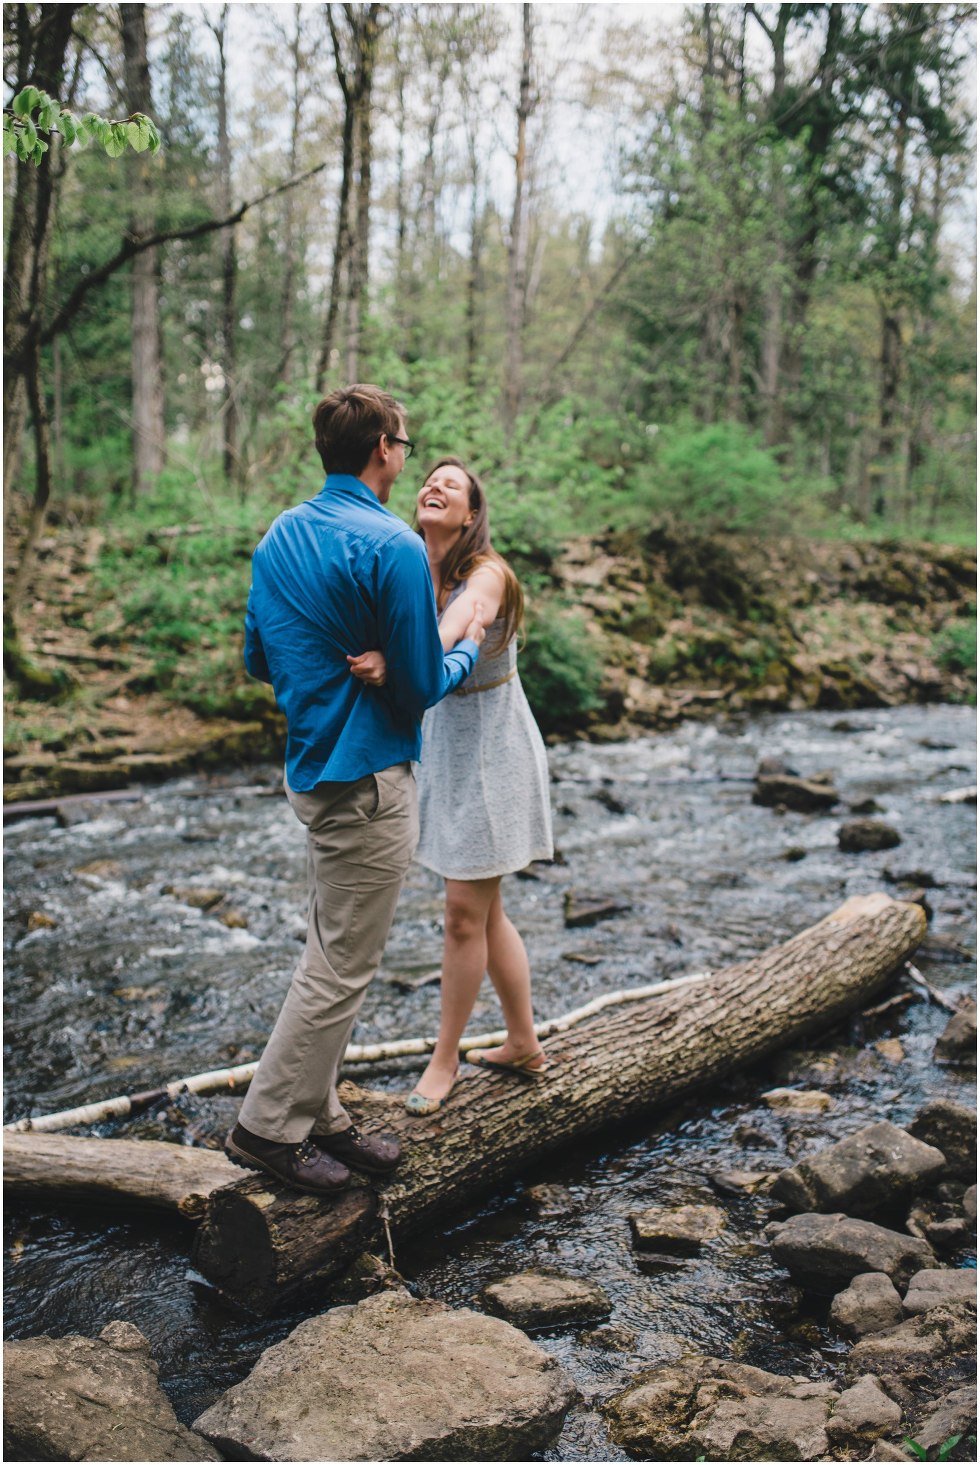 Engaged couple laughing and smiling on a log